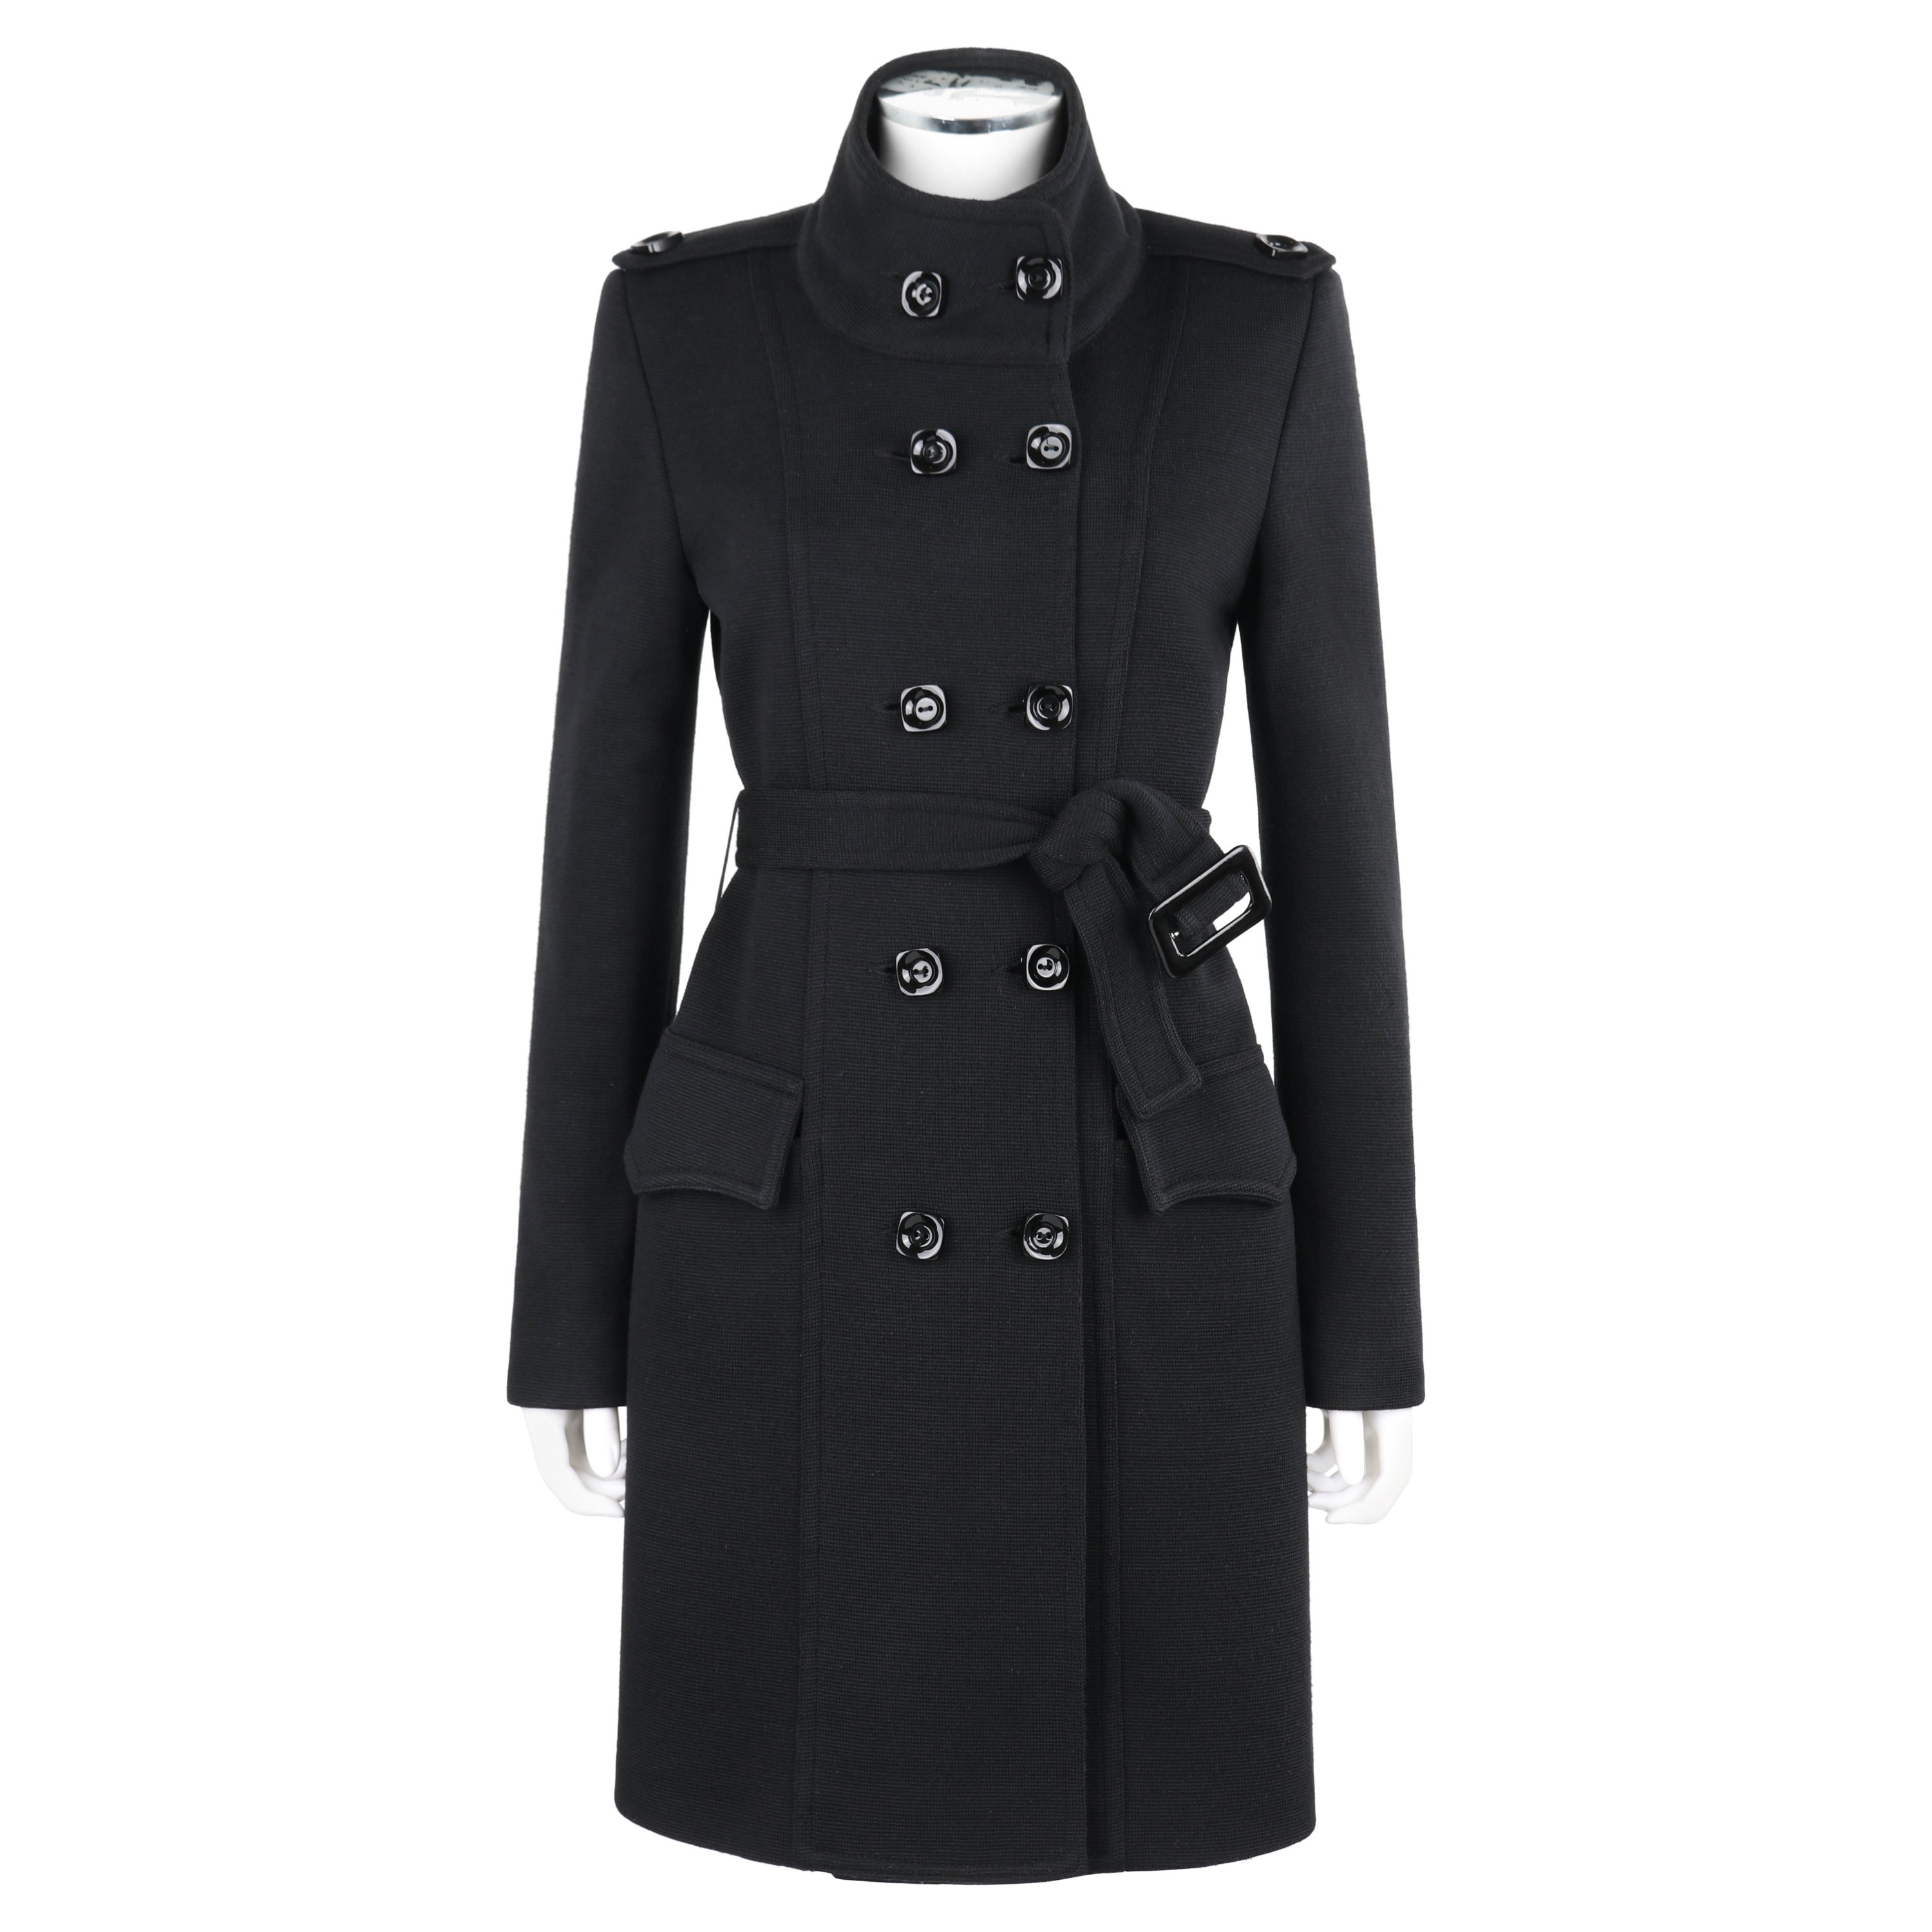 ALEXANDER McQUEEN c.1996 Black Belted Structured Double Breasted Overcoat Coat For Sale